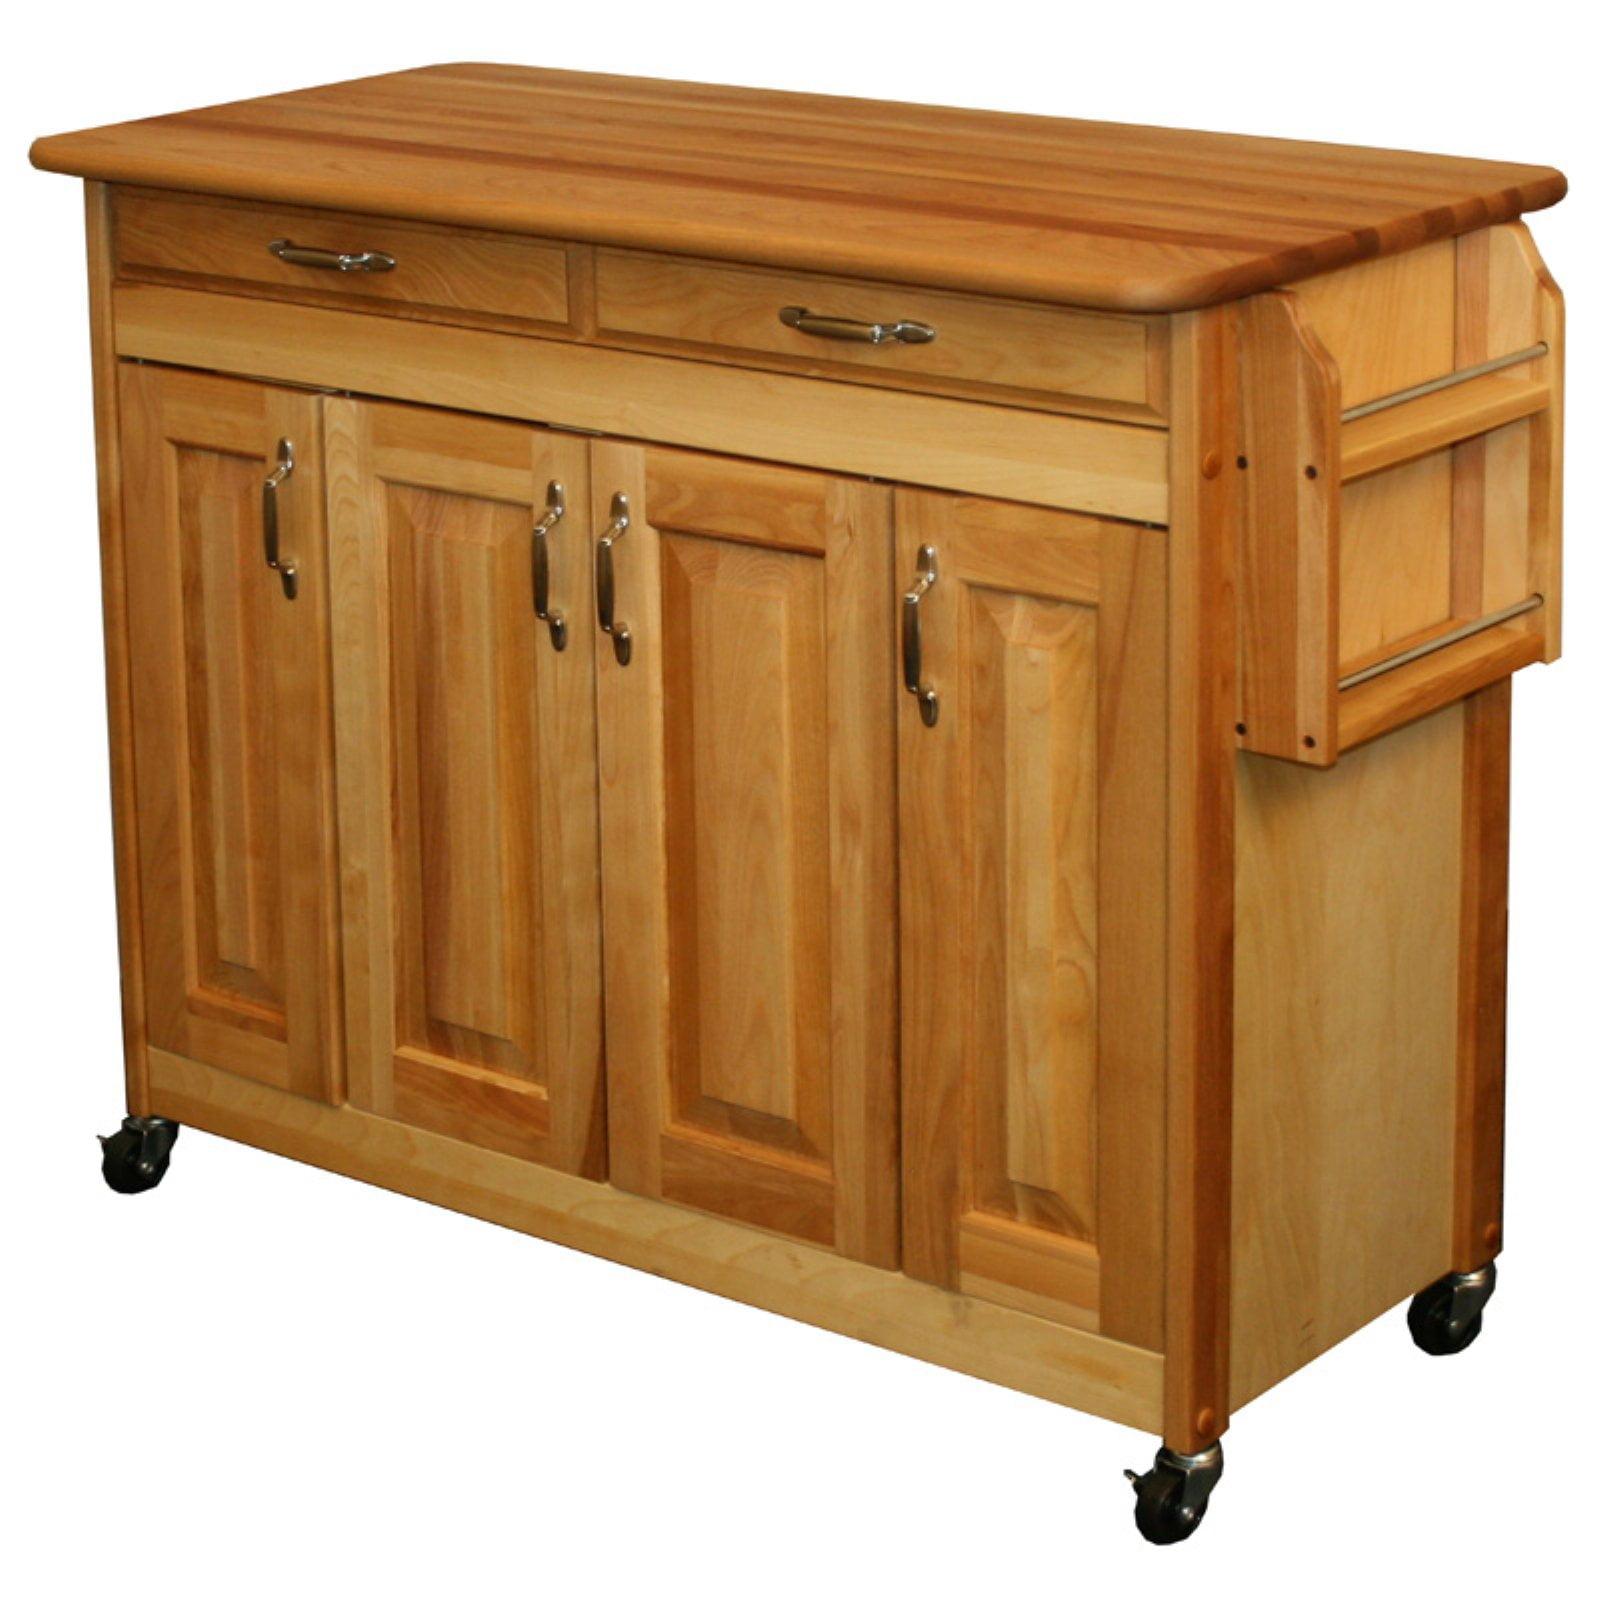 Classic Birch Butcher Block Island with Adjustable Shelves and Casters